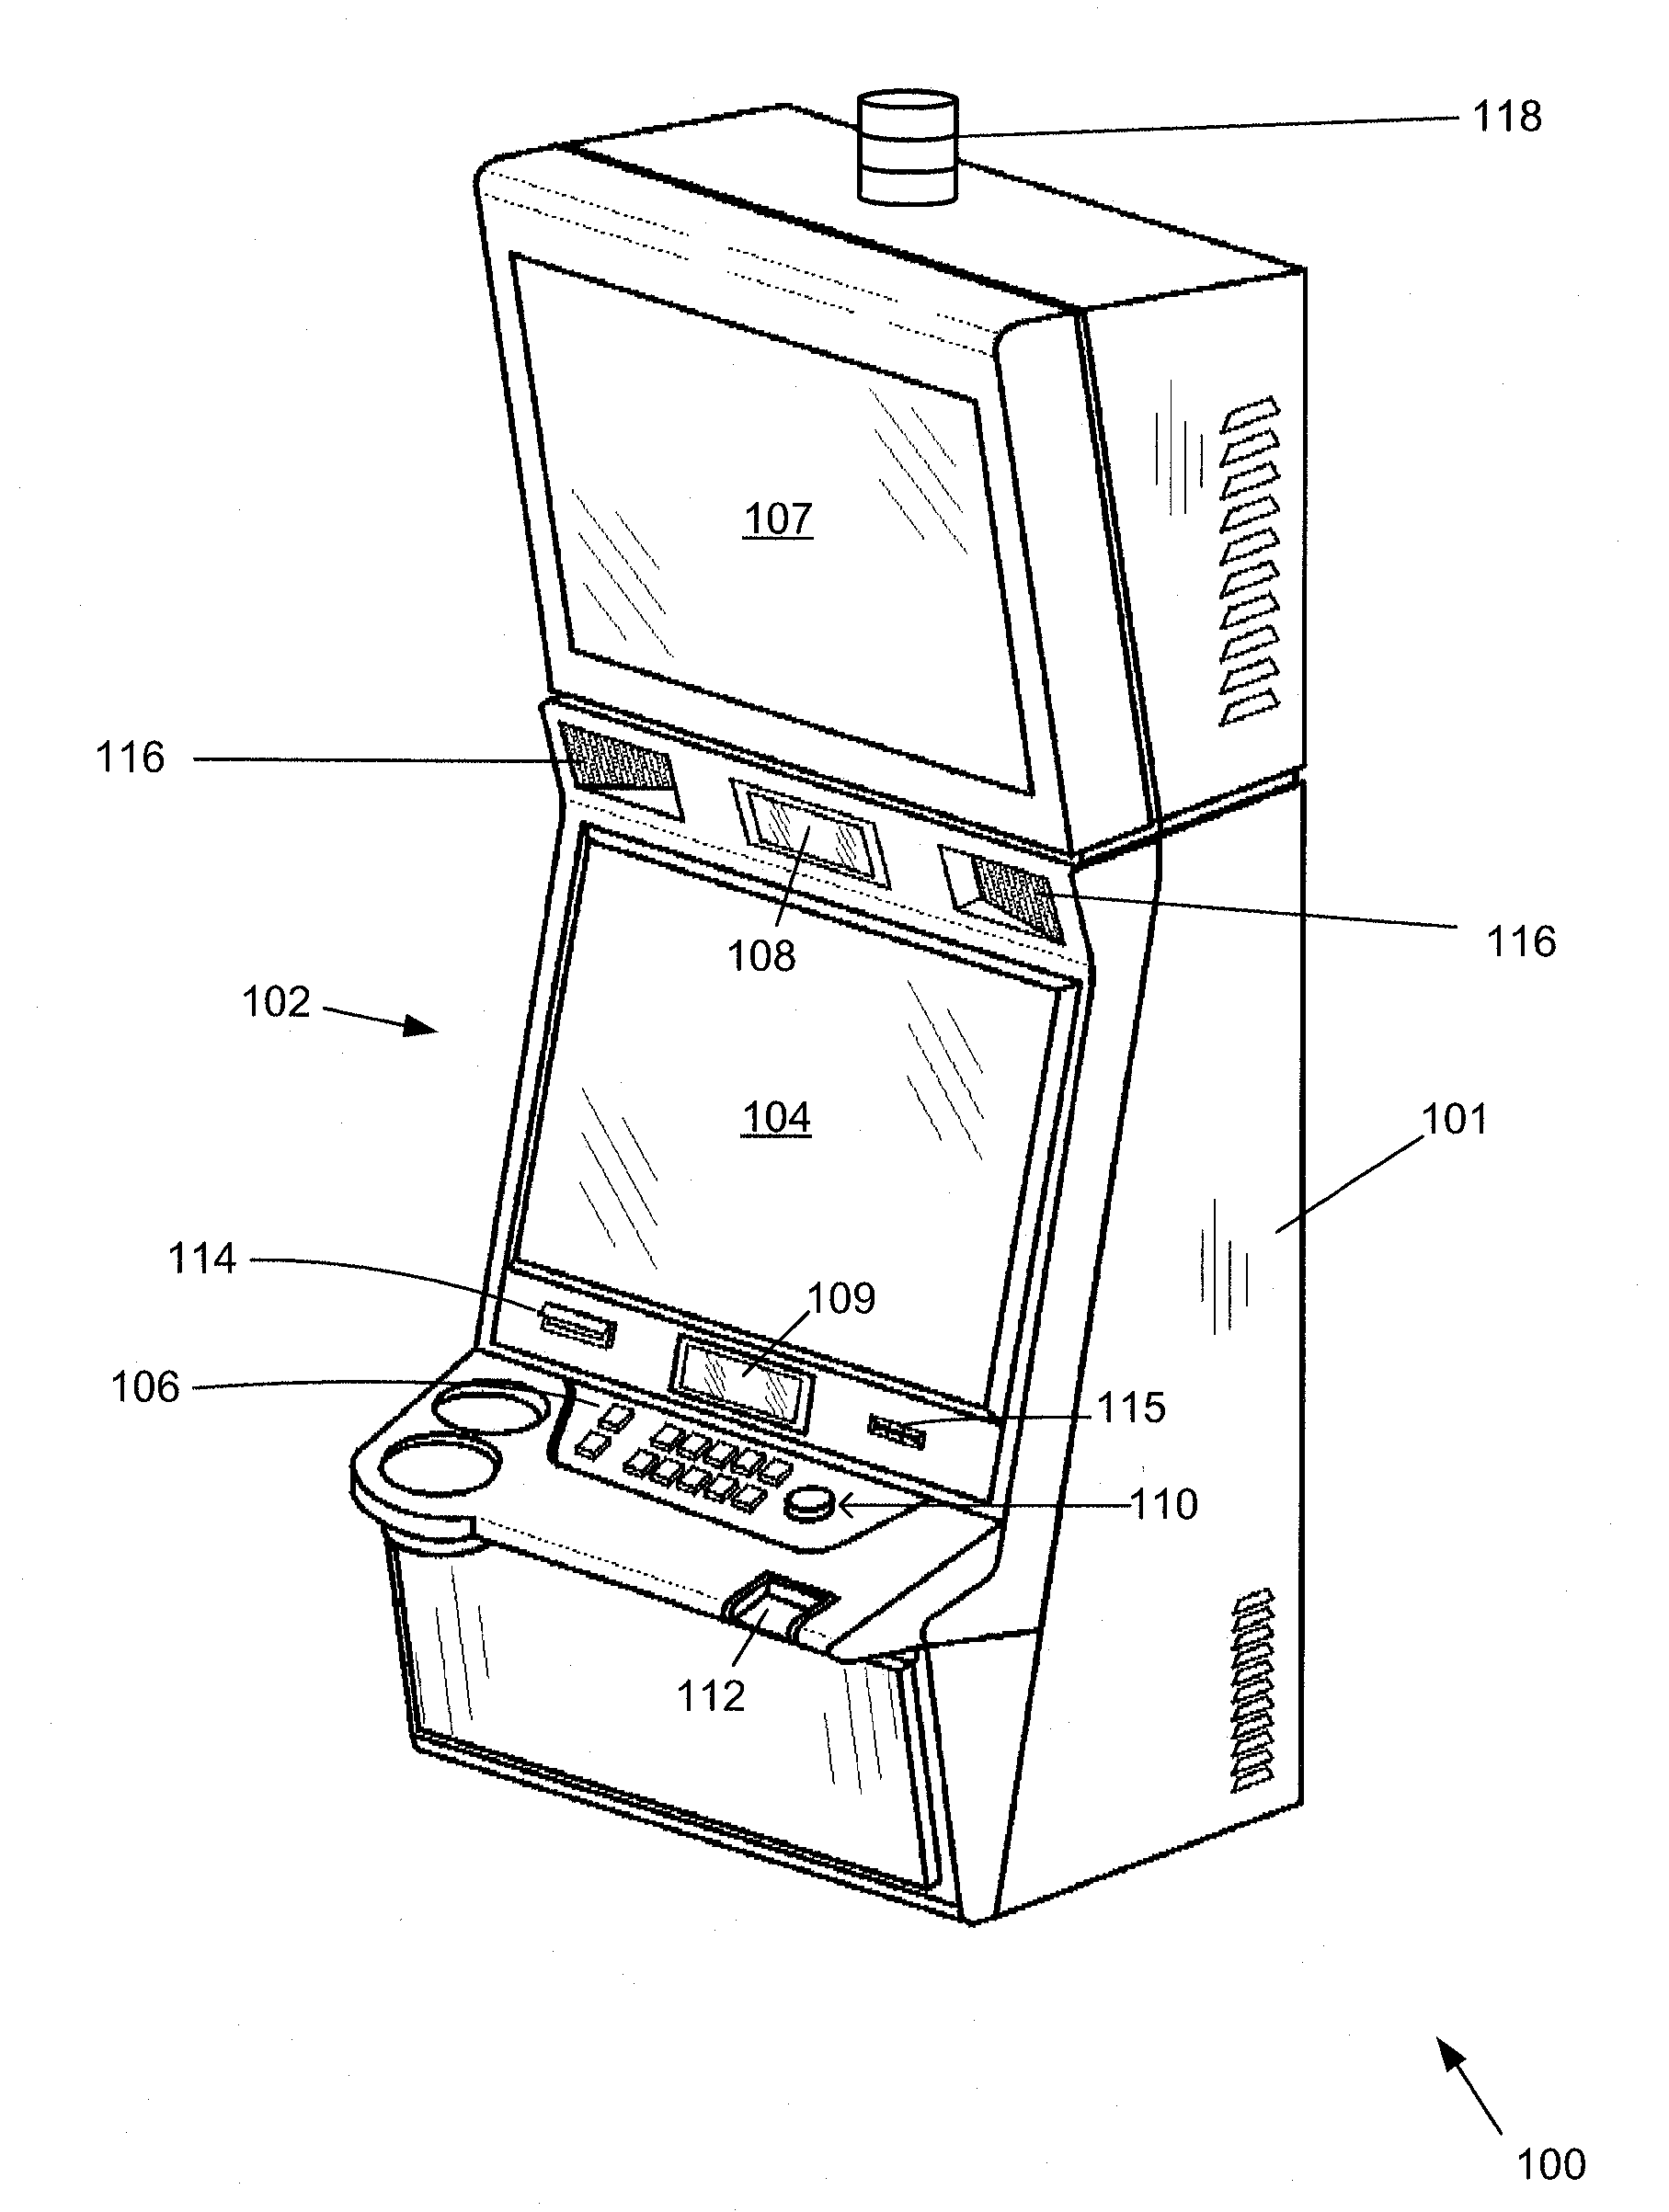 Method, apparatus, and program product for producing and applying a graphic simulation across multiple gaming machines